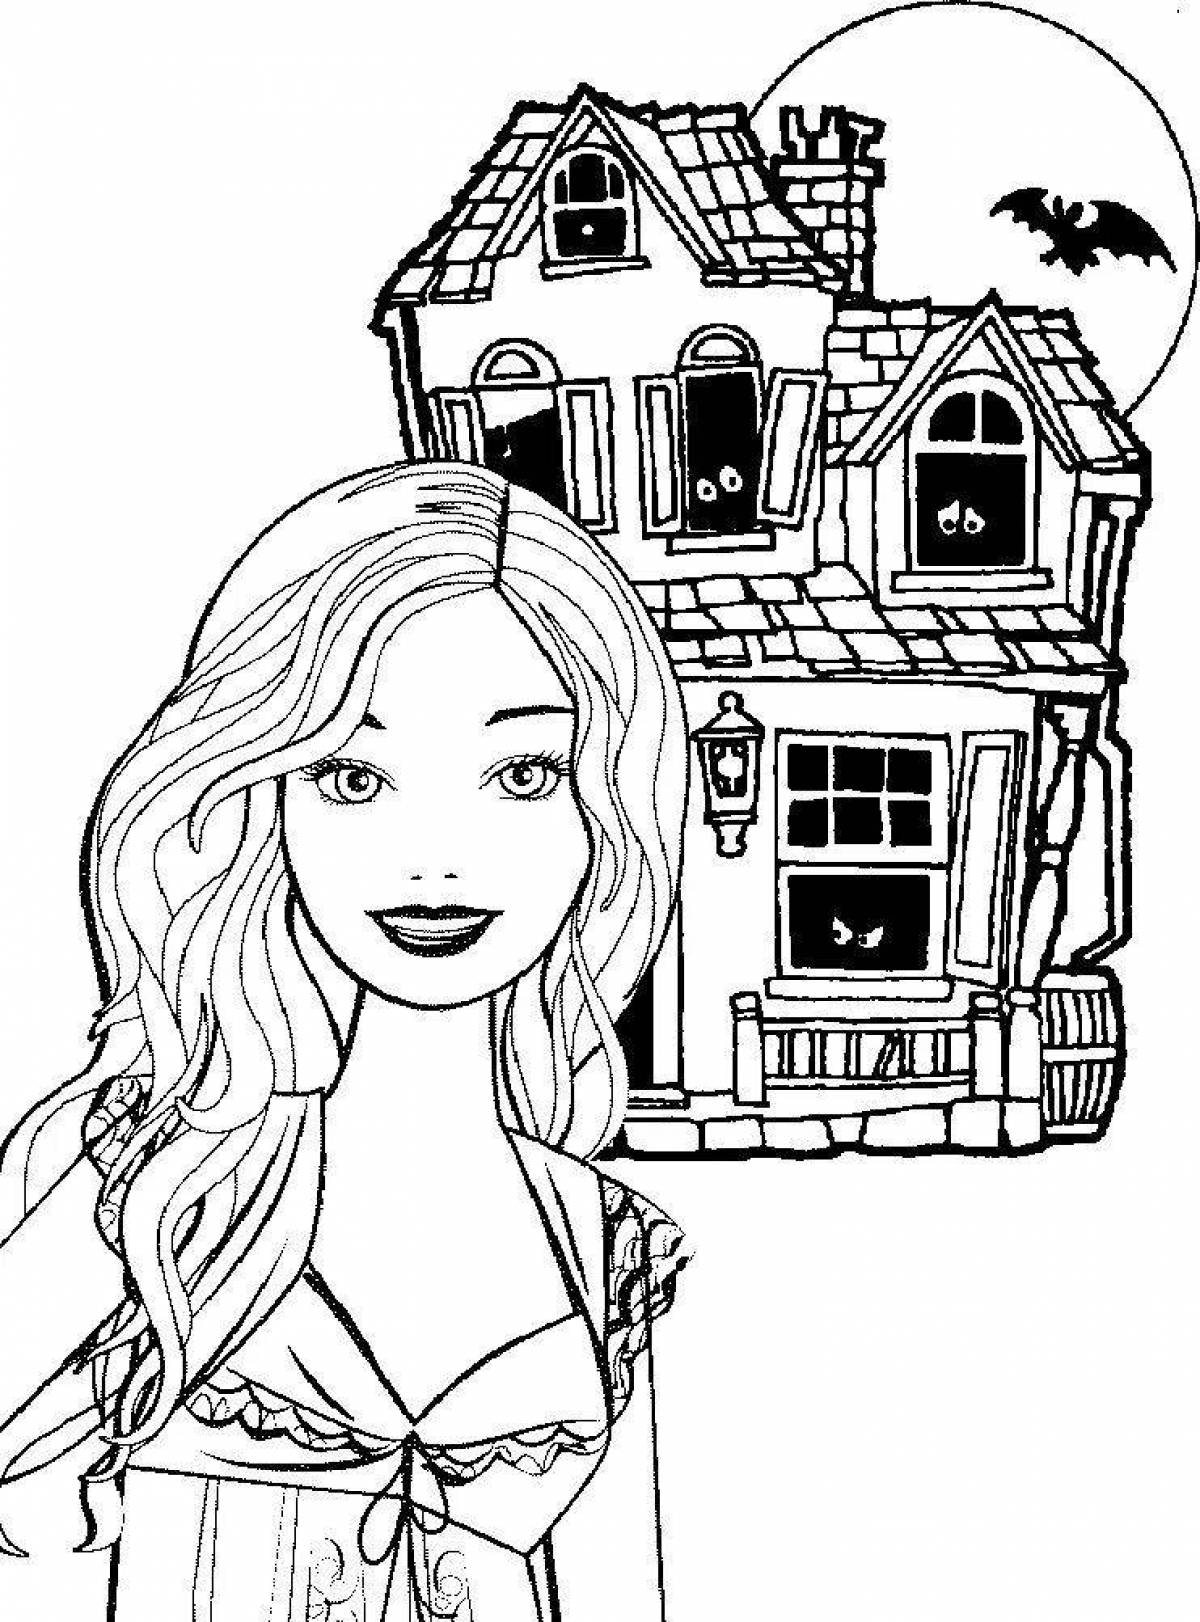 Coloring barbie's glamorous house